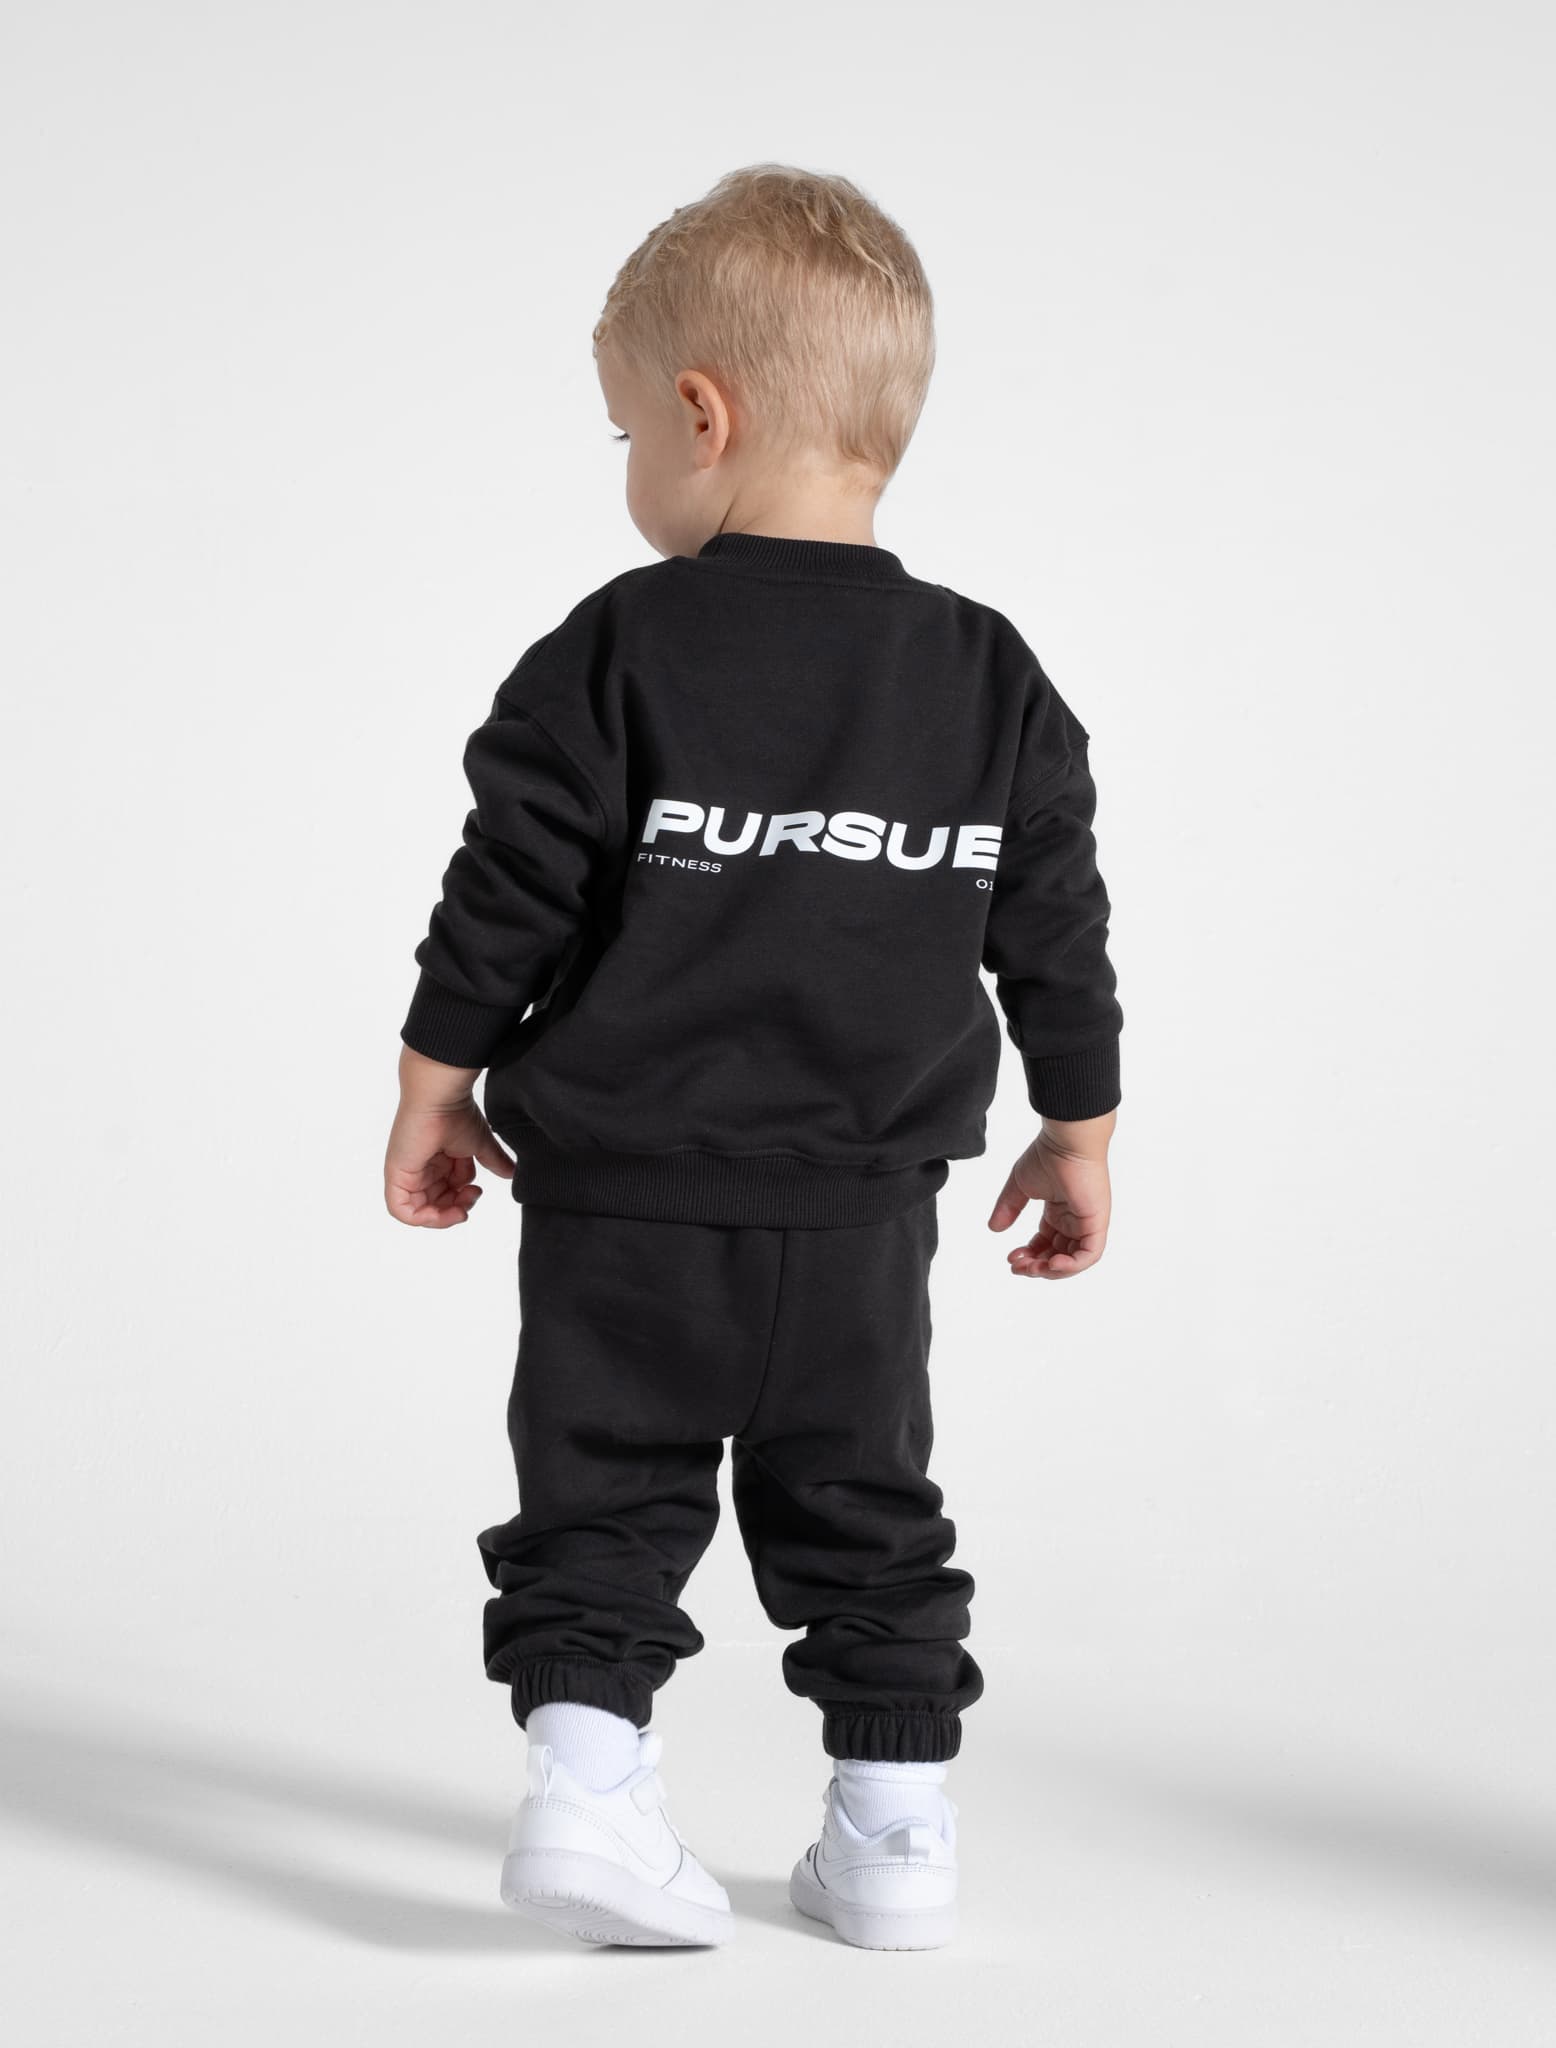 Pursue Fitness Official Store